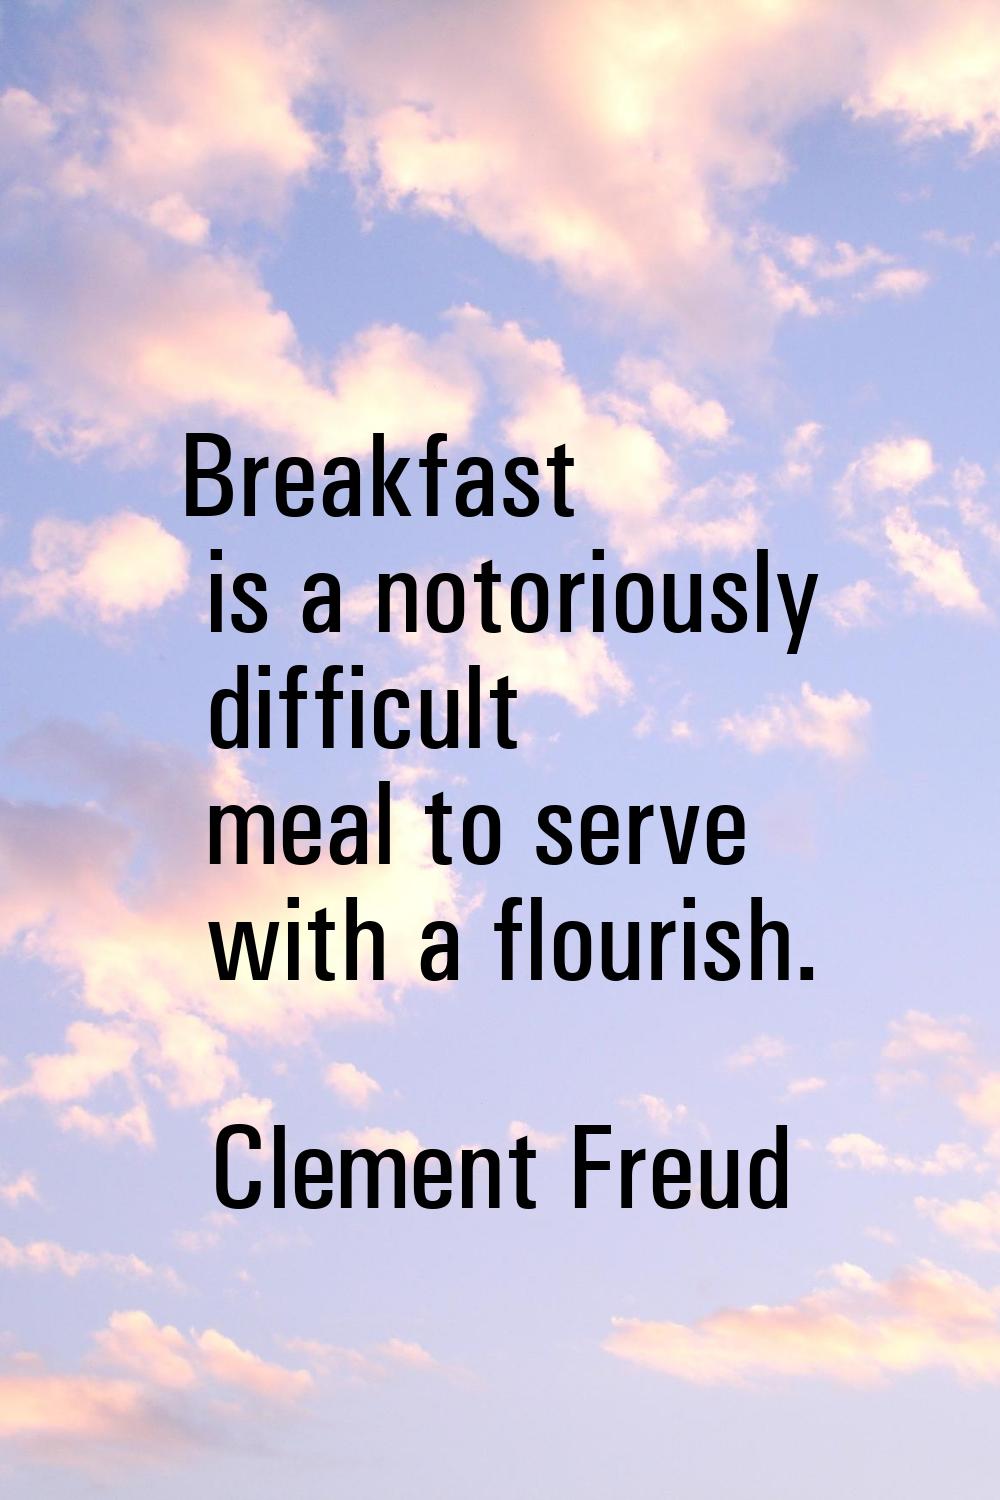 Breakfast is a notoriously difficult meal to serve with a flourish.